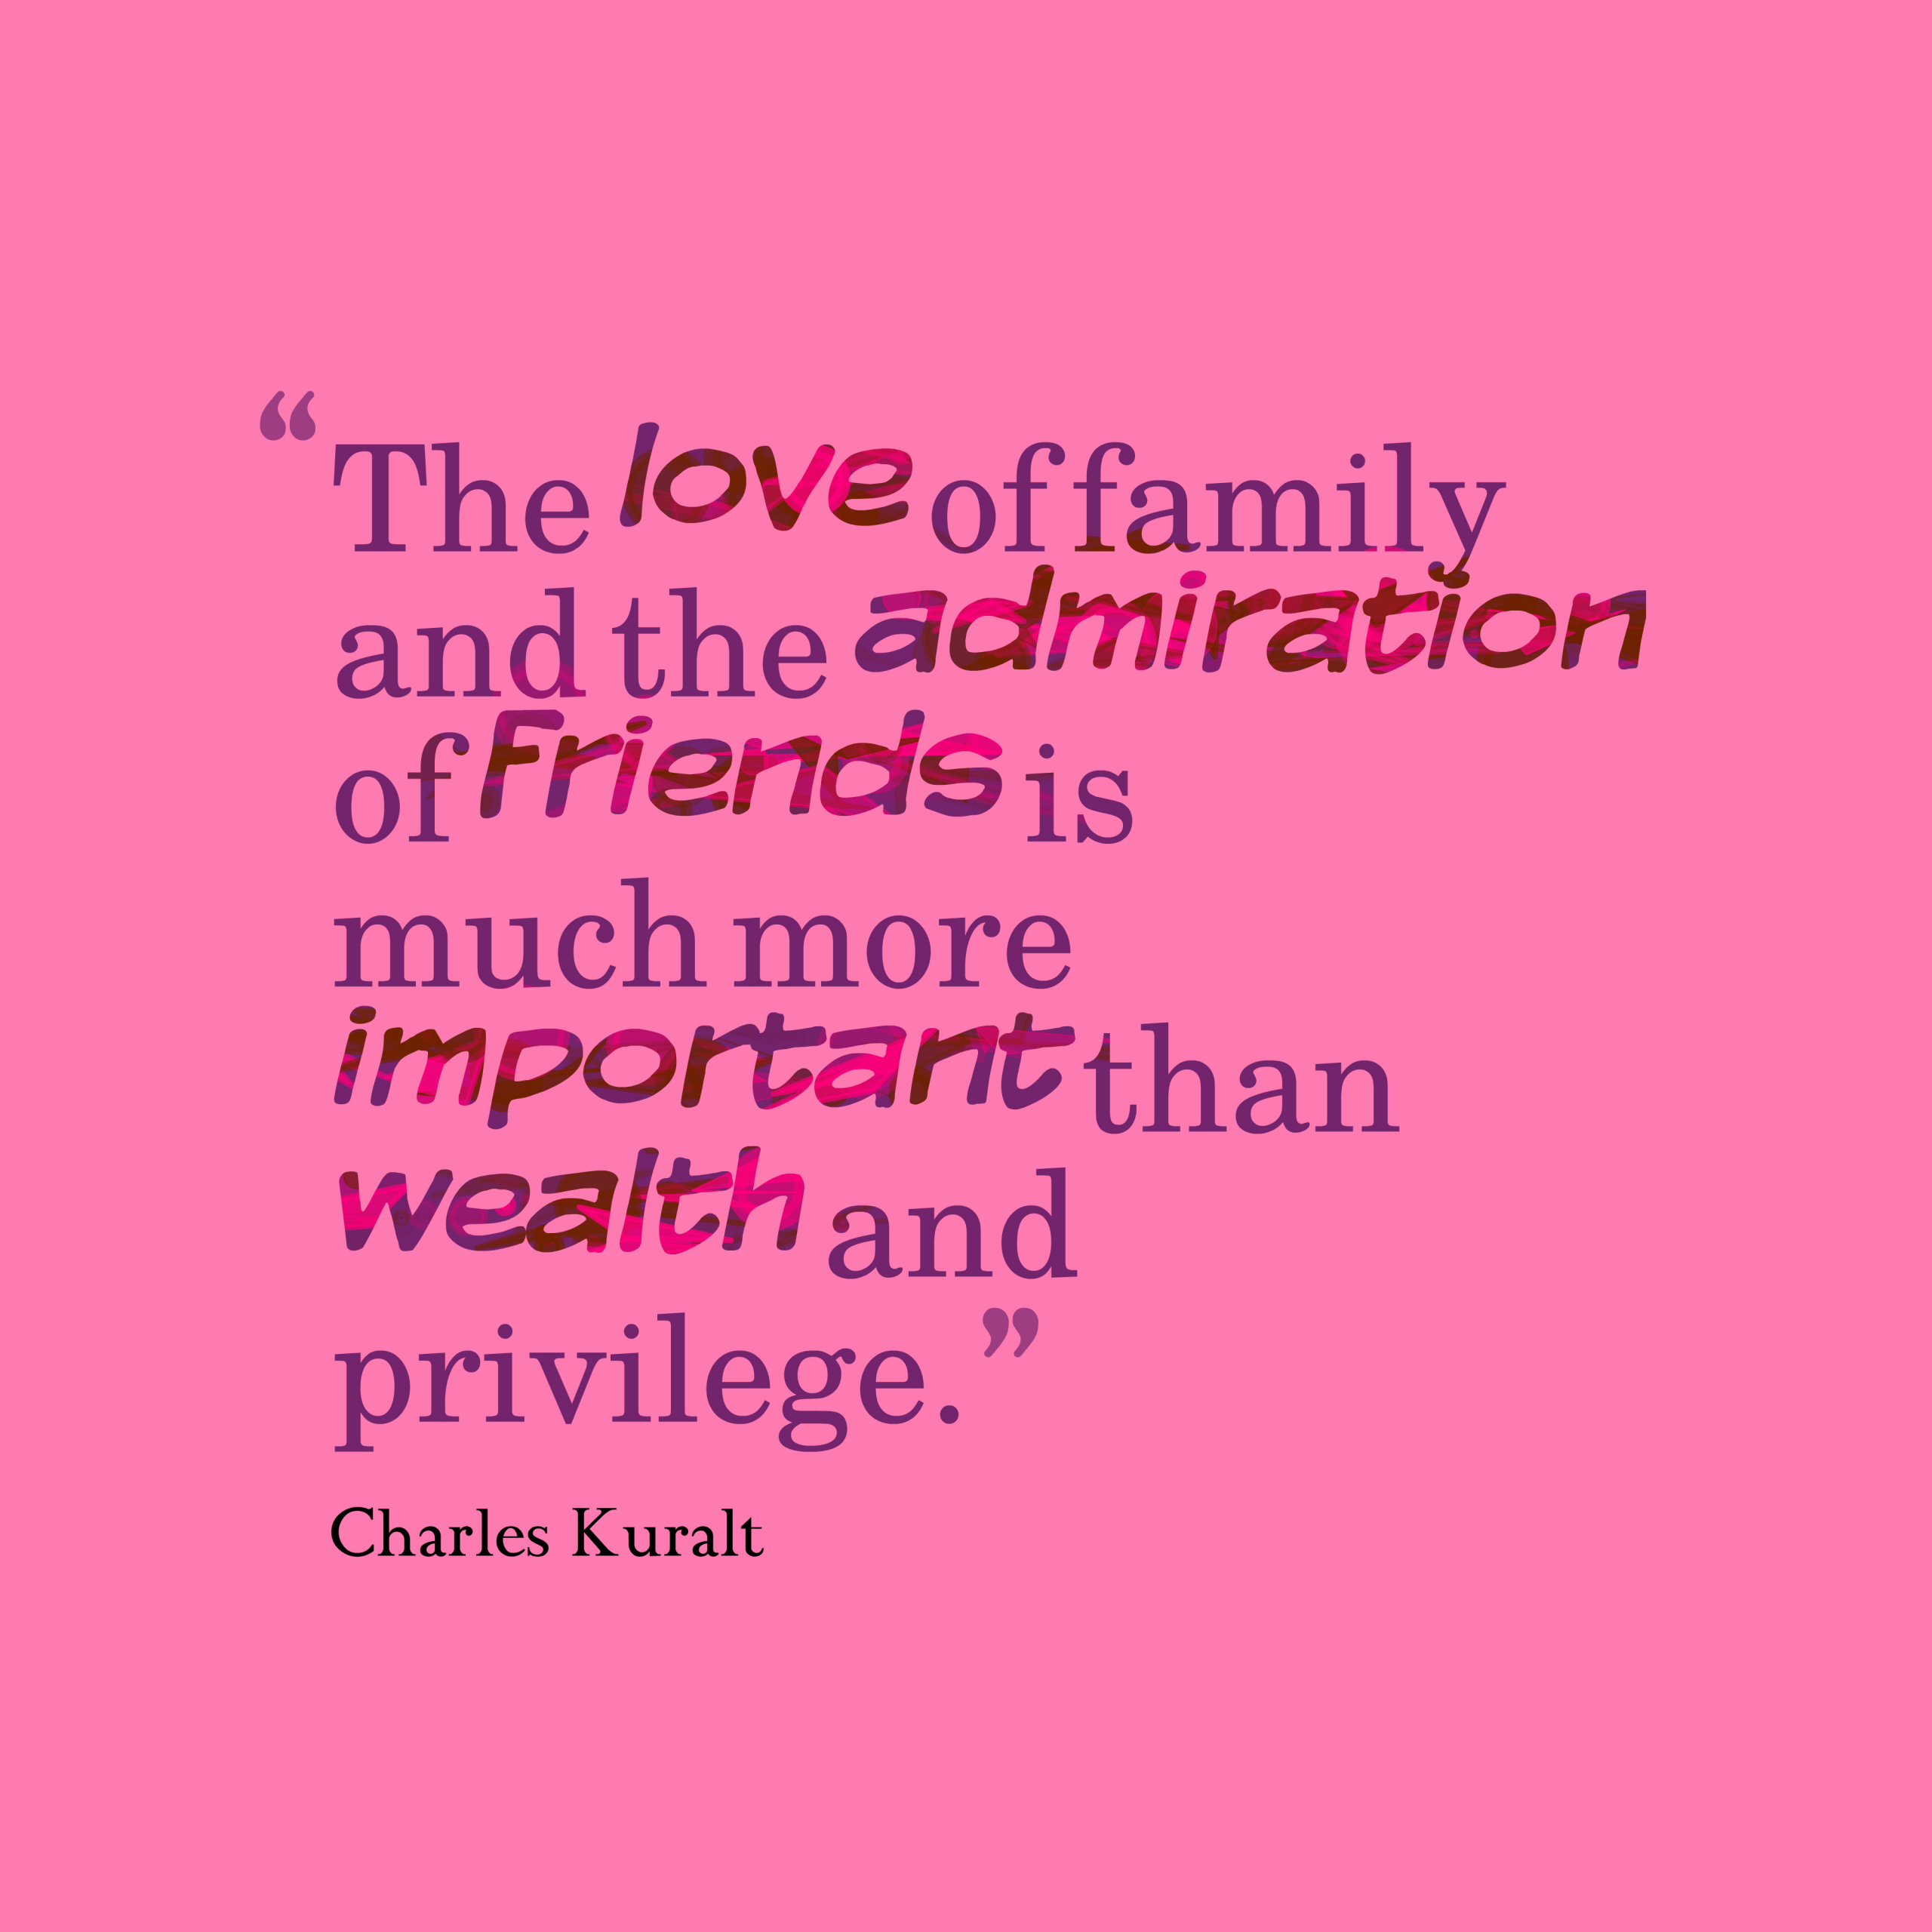 Love Quotes For Family And Friends
 The Love Family And The Admiration Friends